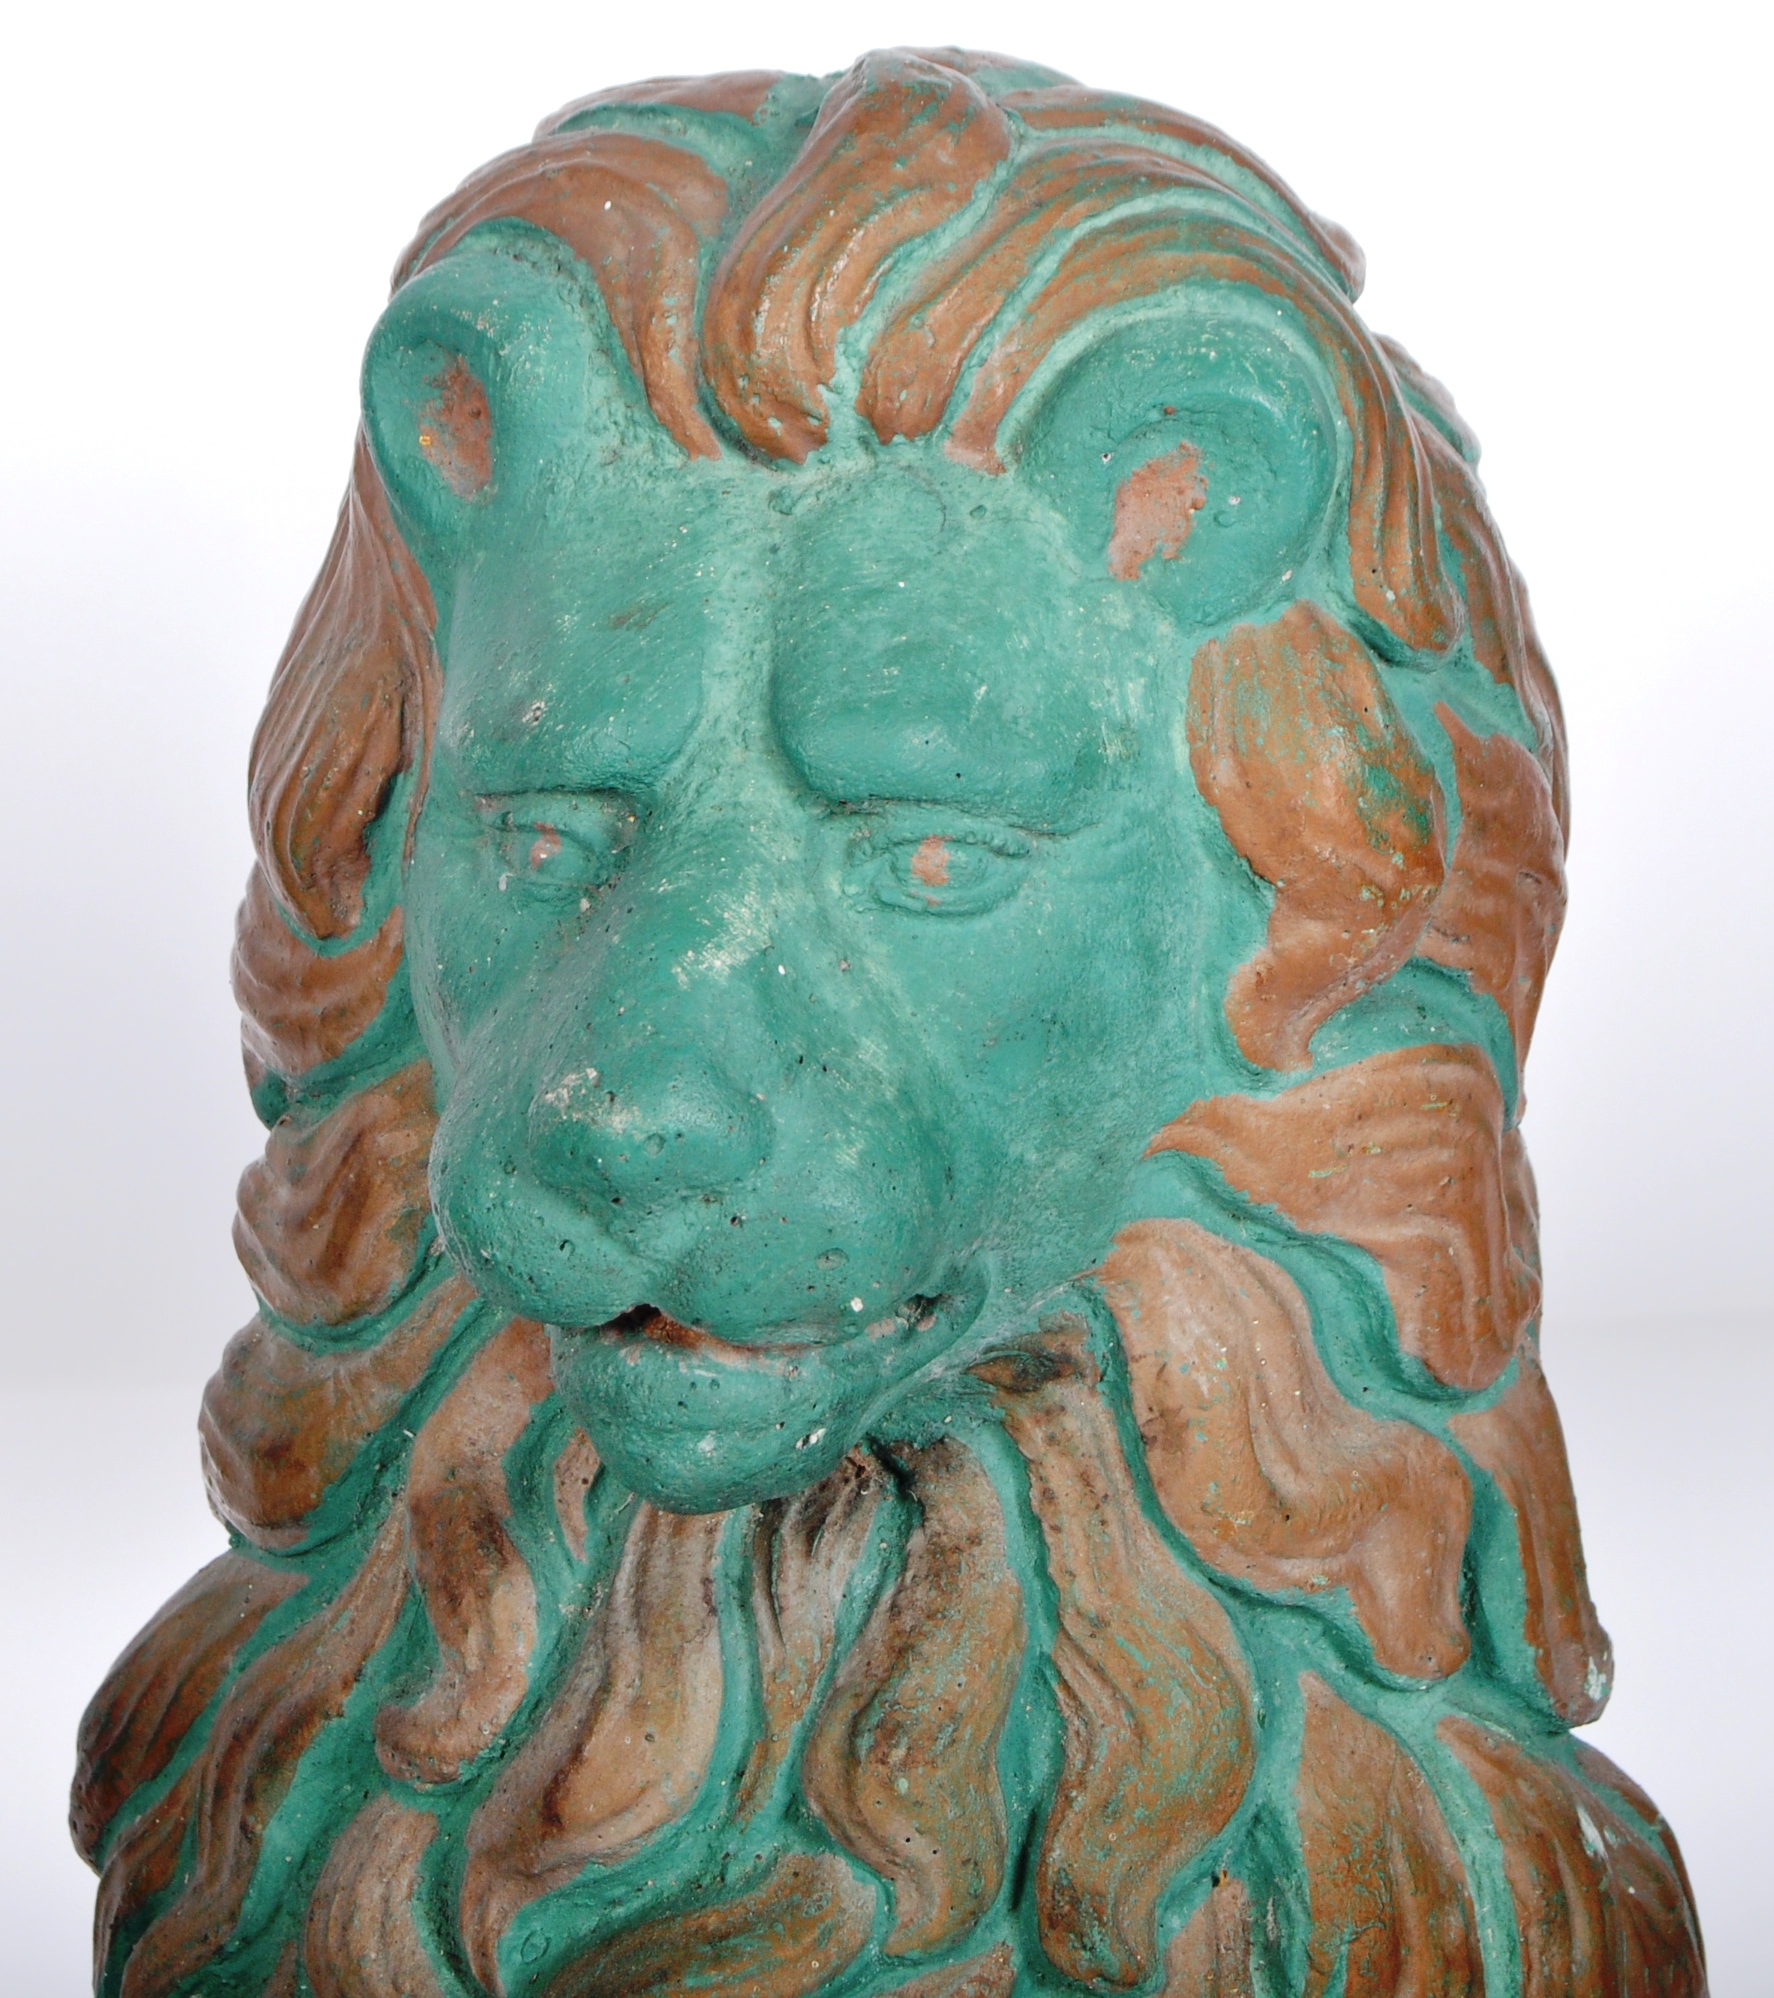 MATCHING PAIR OF PAINTED RECONSTITUTED STONE LION FIGURES - Image 8 of 12